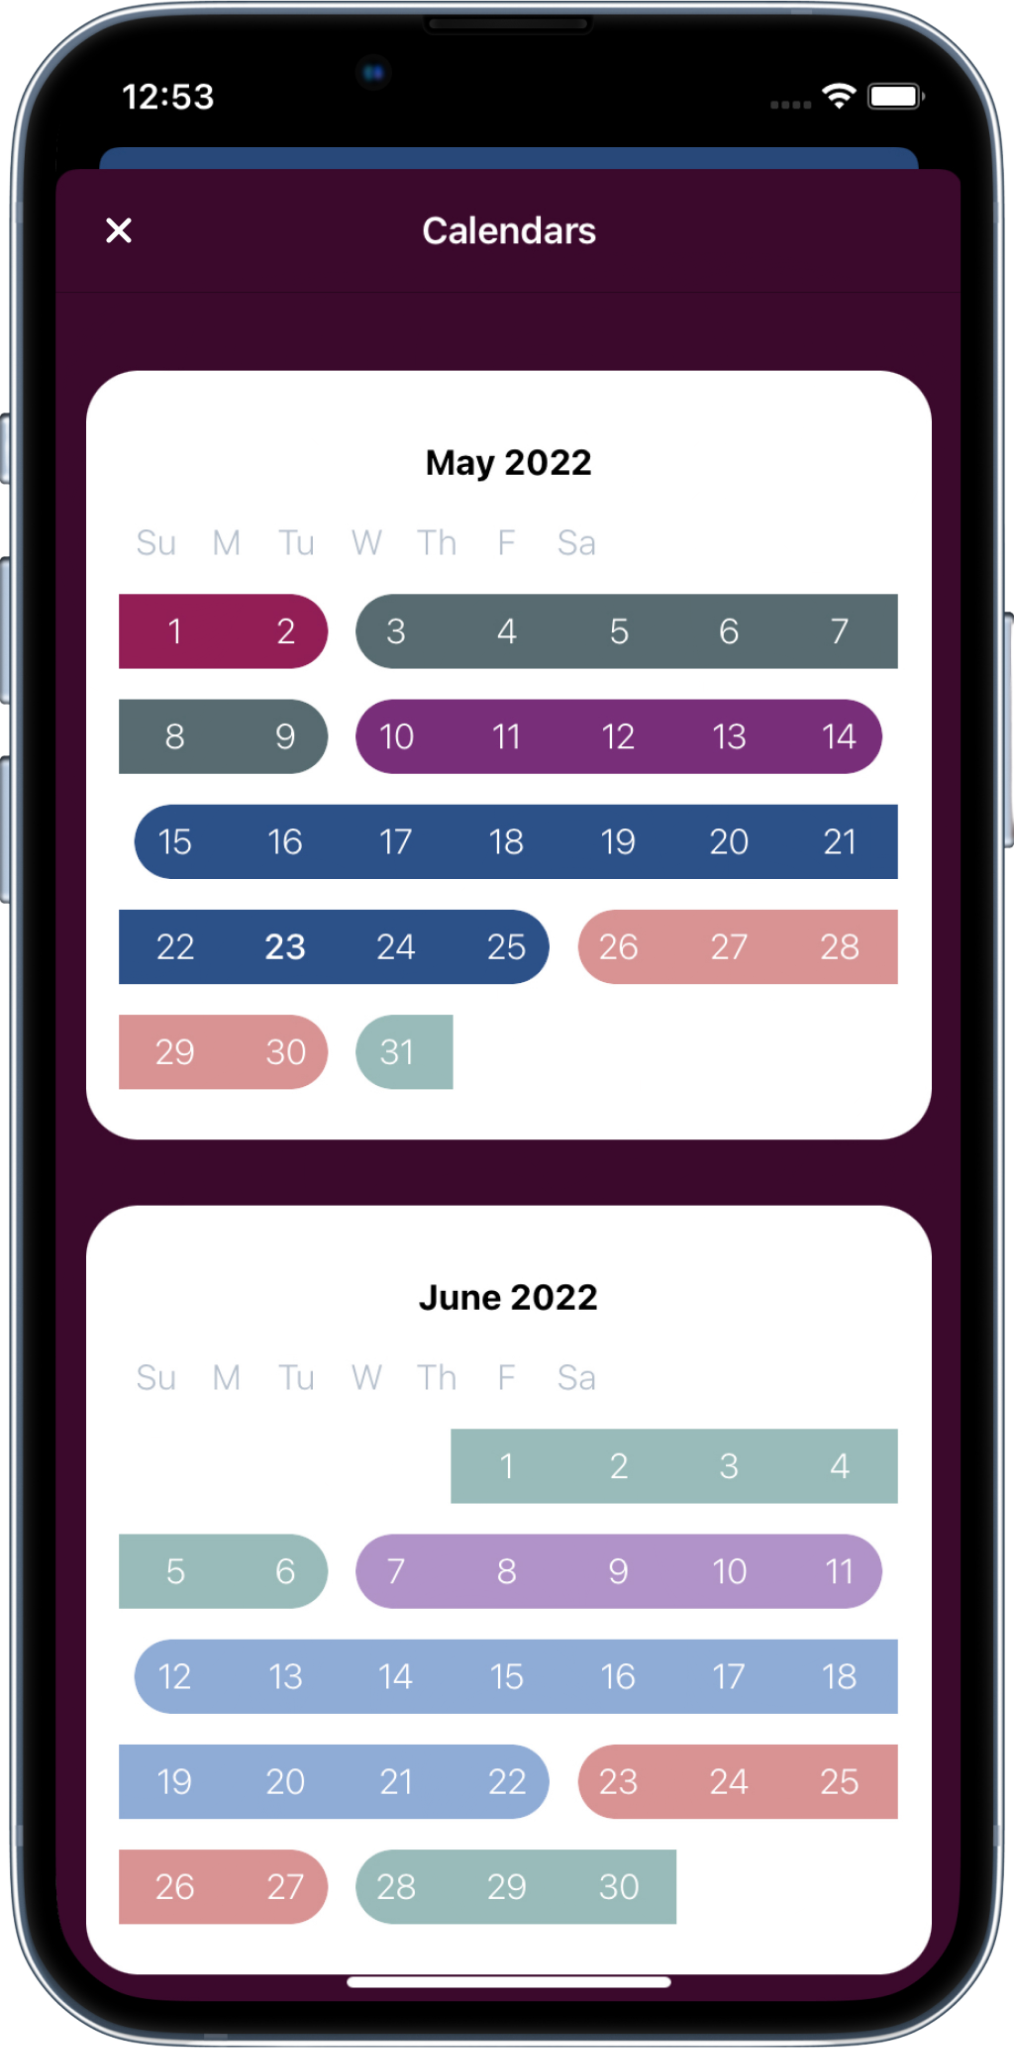 The Agenda App has different colors within it to help you understand when your cycle changes between phases.